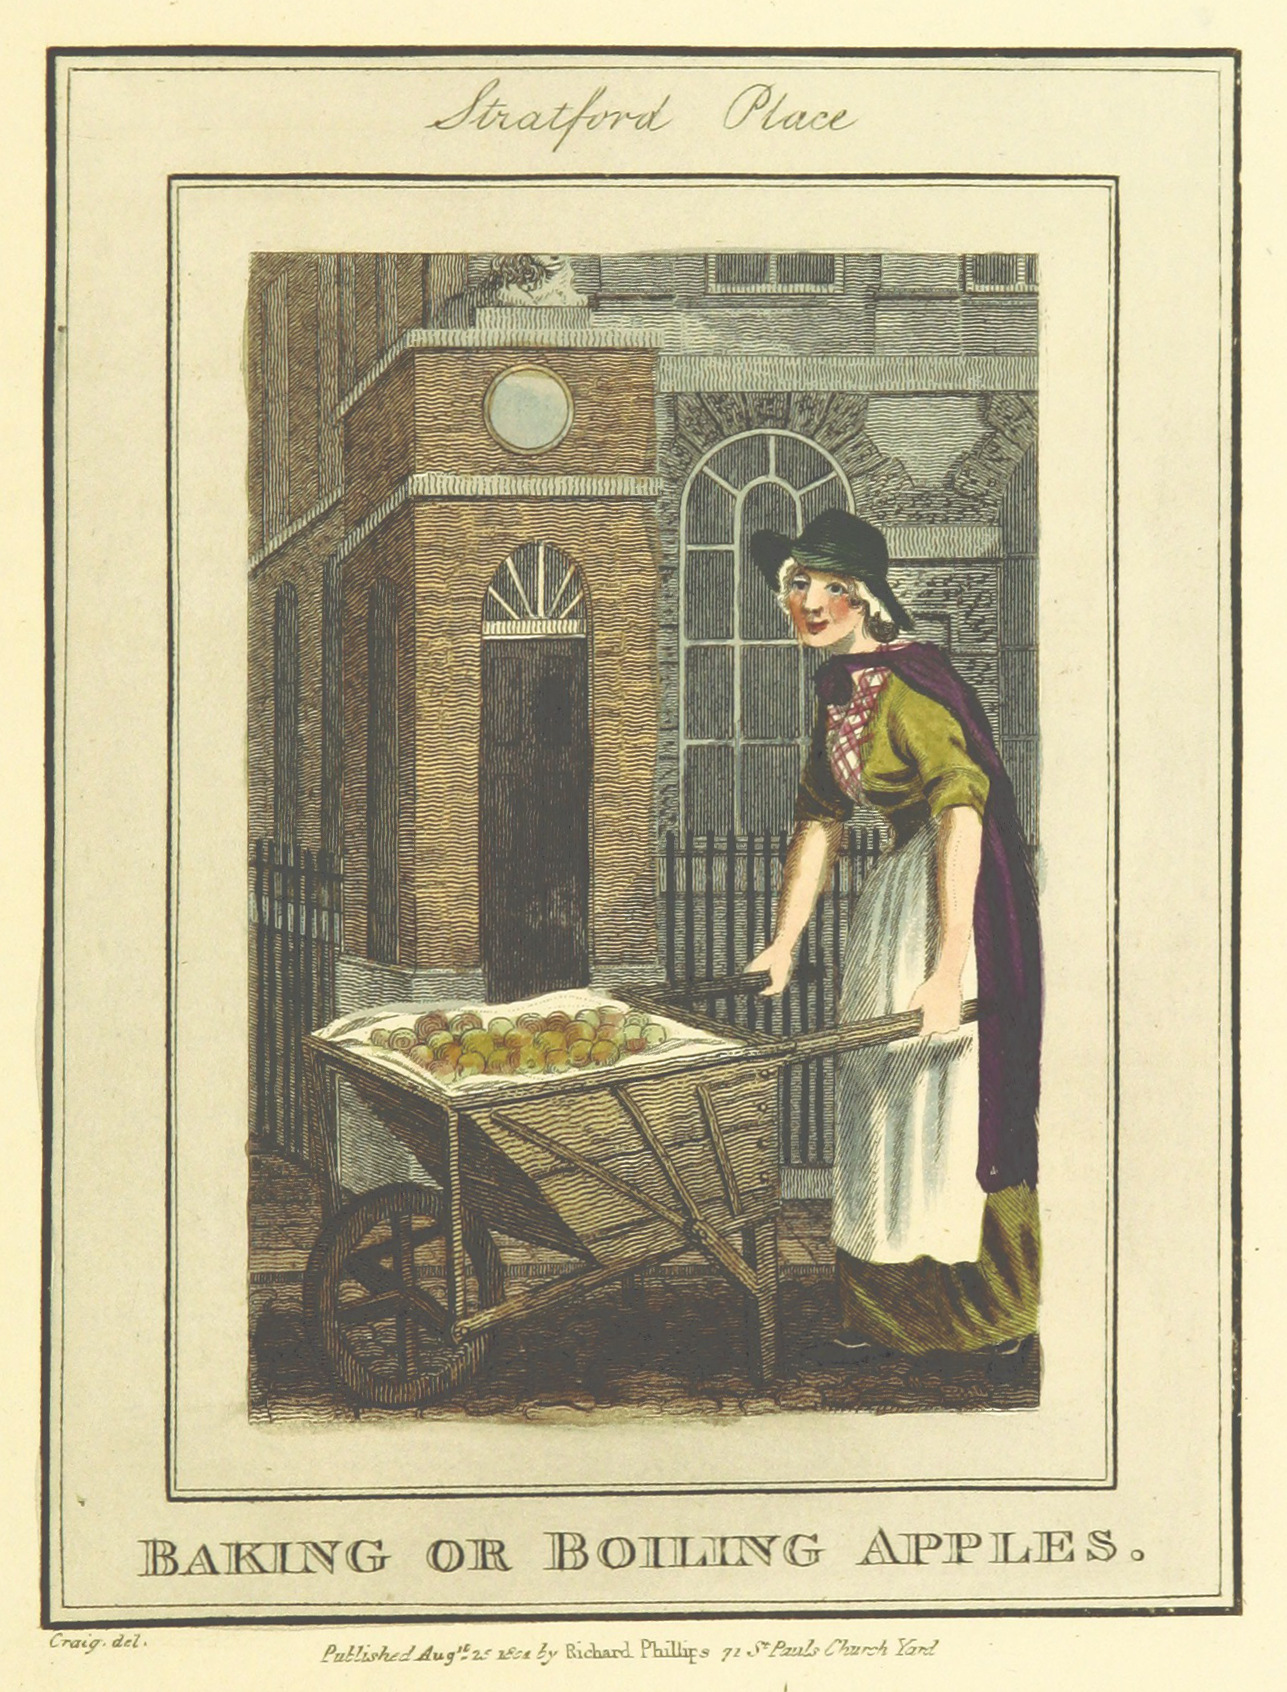 Phillips(1804)_p553_-_Stratford_Place_-_Baking_or_Boiling_Apples